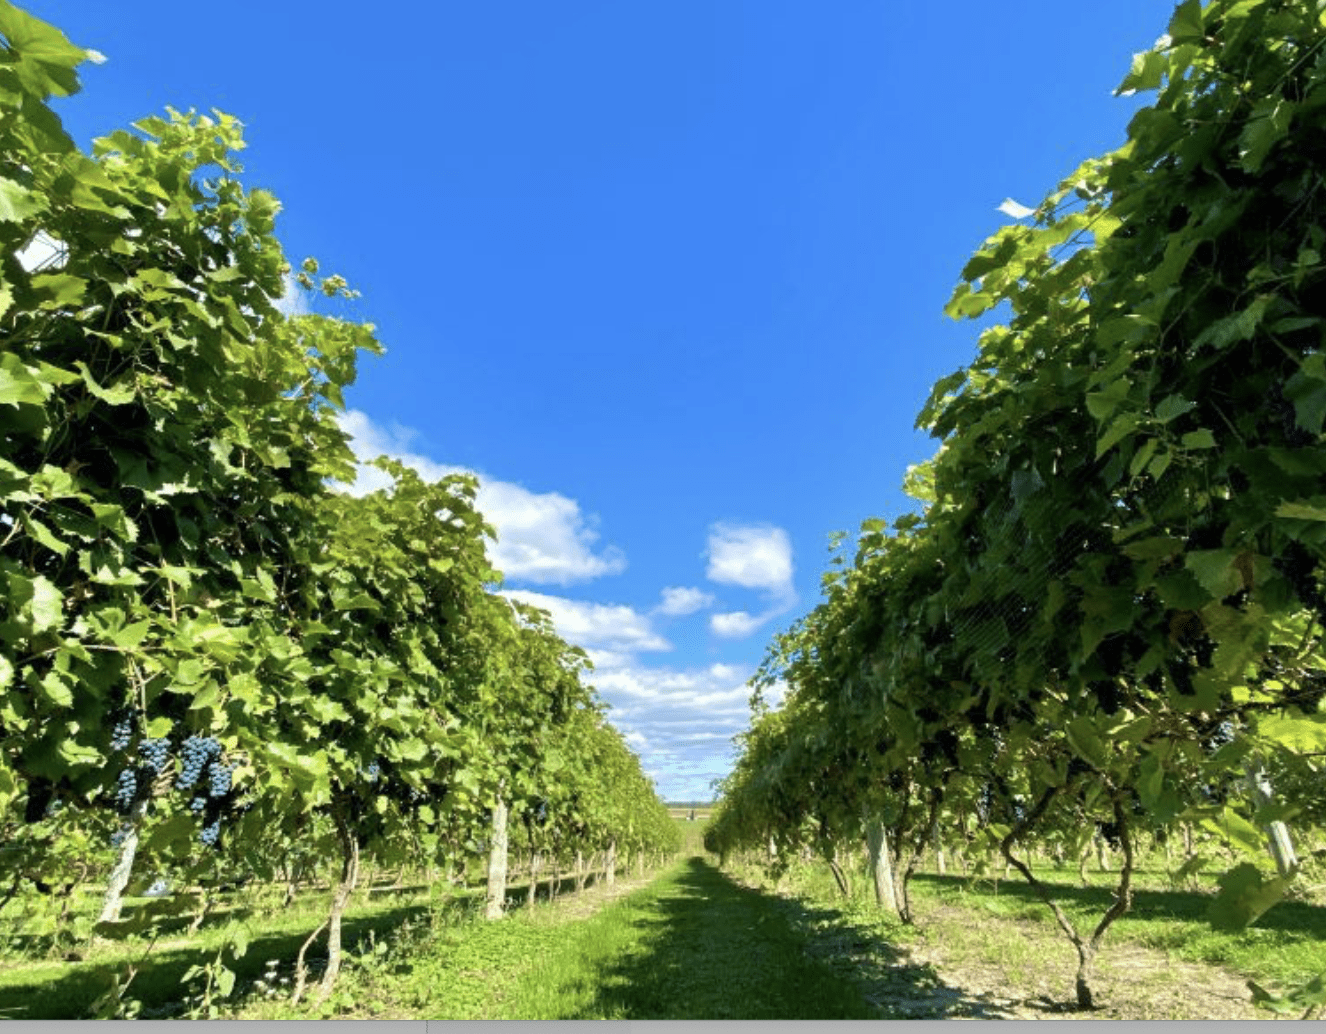 Blue sky with white clouds above with rows of grapes on each side of a grass lined path